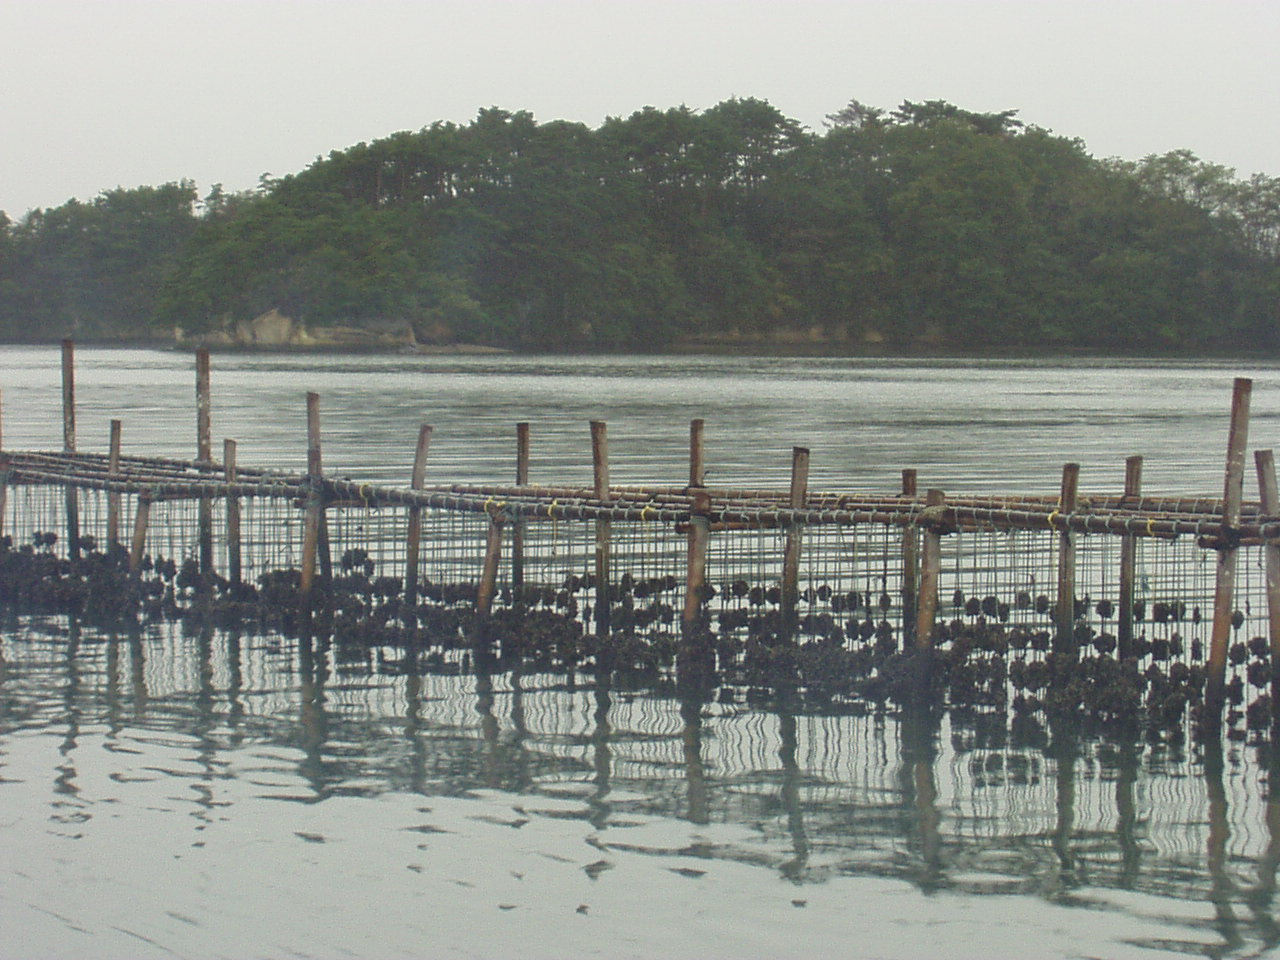 View of long-line oyster culture at low tide in Matsushima Bay, Japan